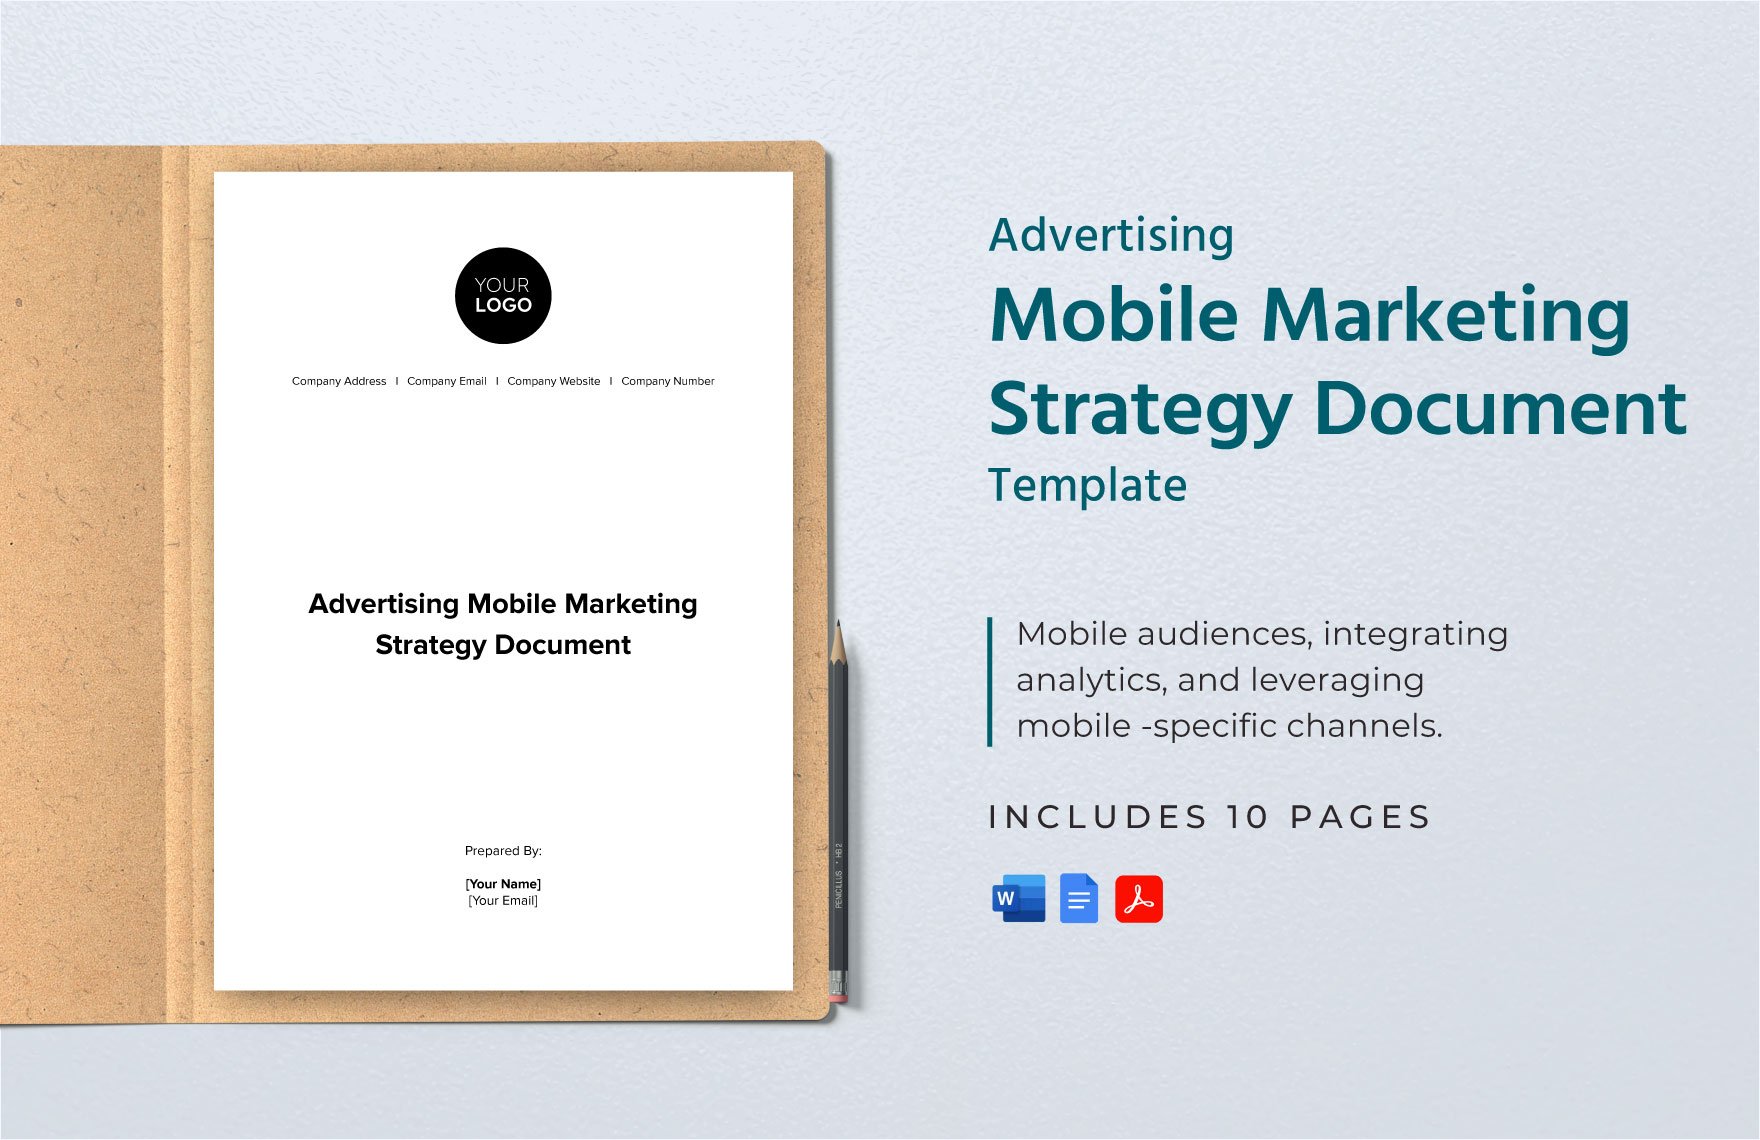 Advertising Mobile Marketing Strategy Document Template in Word, Google Docs, PDF